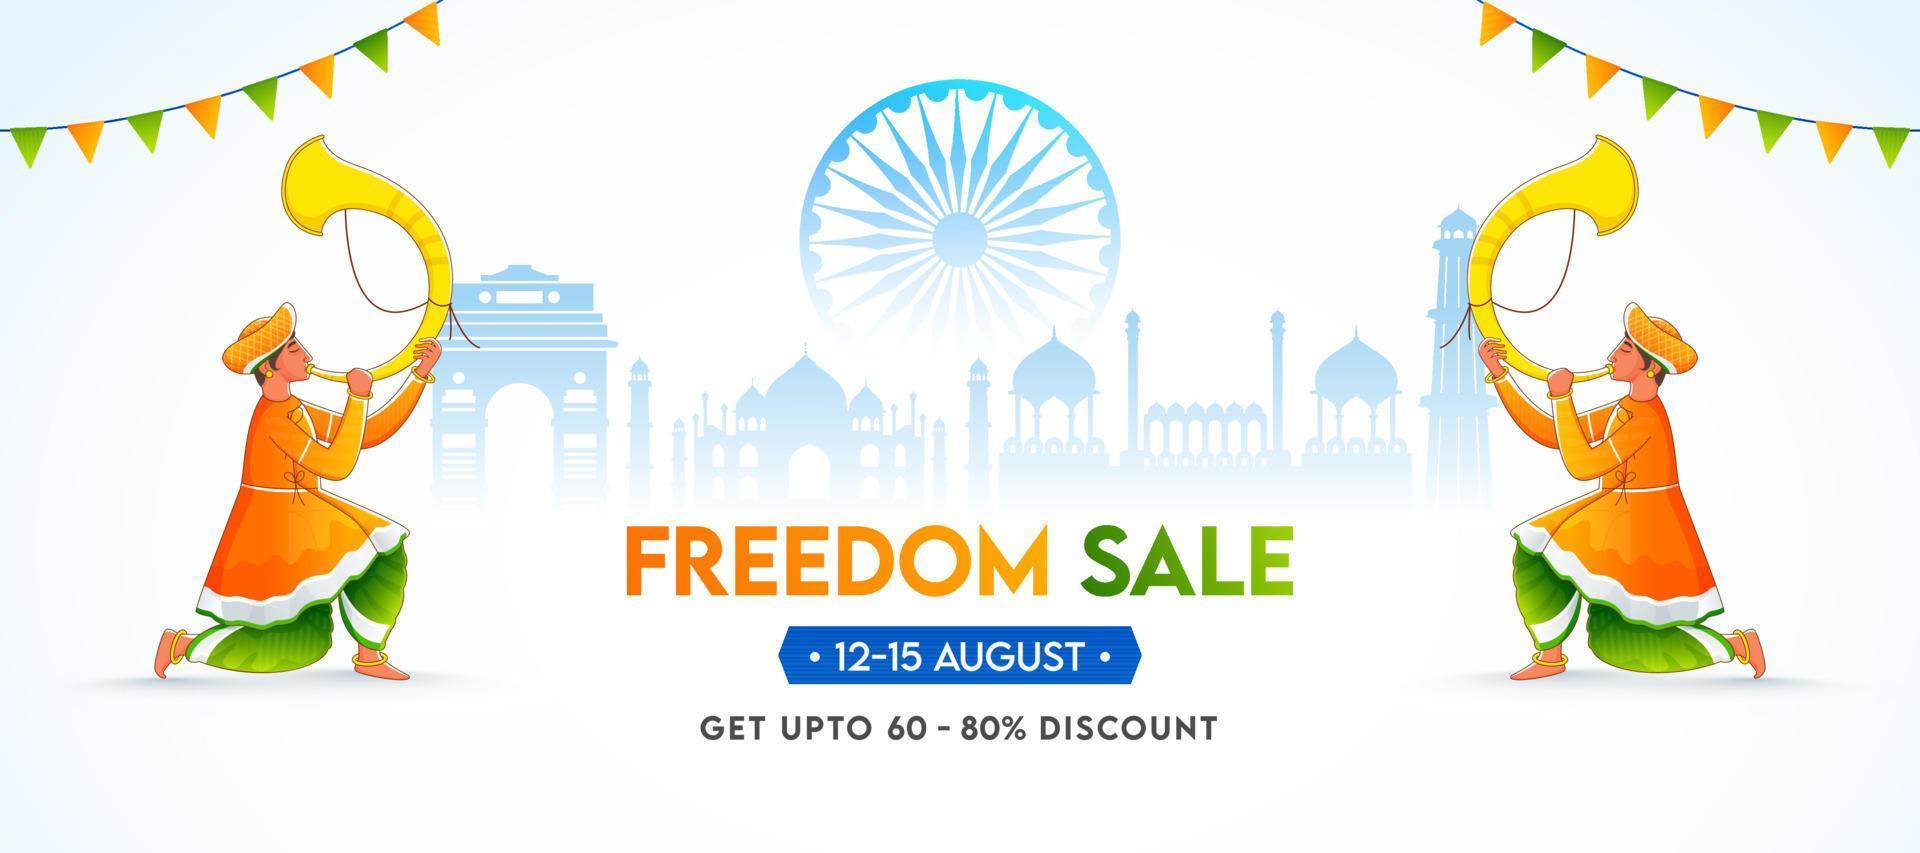 Freedom Sale Banner Design with Discount Offer, Famous Monuments, Ashoka Wheel and Tutari Player on the Occasion of 15th August Celebration. vector